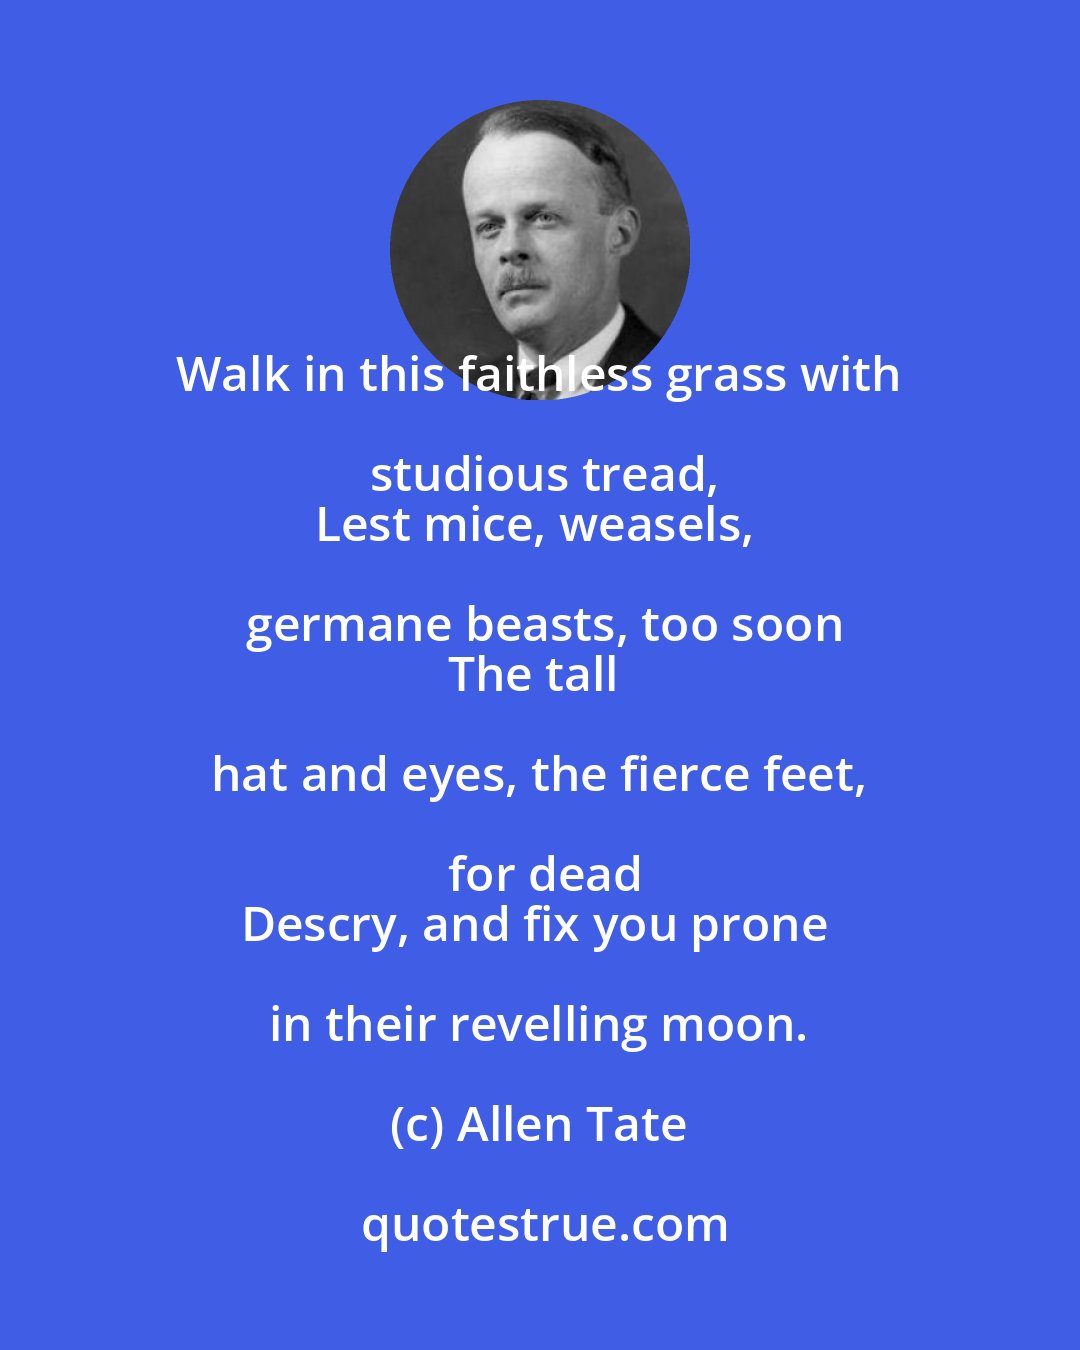 Allen Tate: Walk in this faithless grass with studious tread,
Lest mice, weasels, germane beasts, too soon
The tall hat and eyes, the fierce feet, for dead
Descry, and fix you prone in their revelling moon.